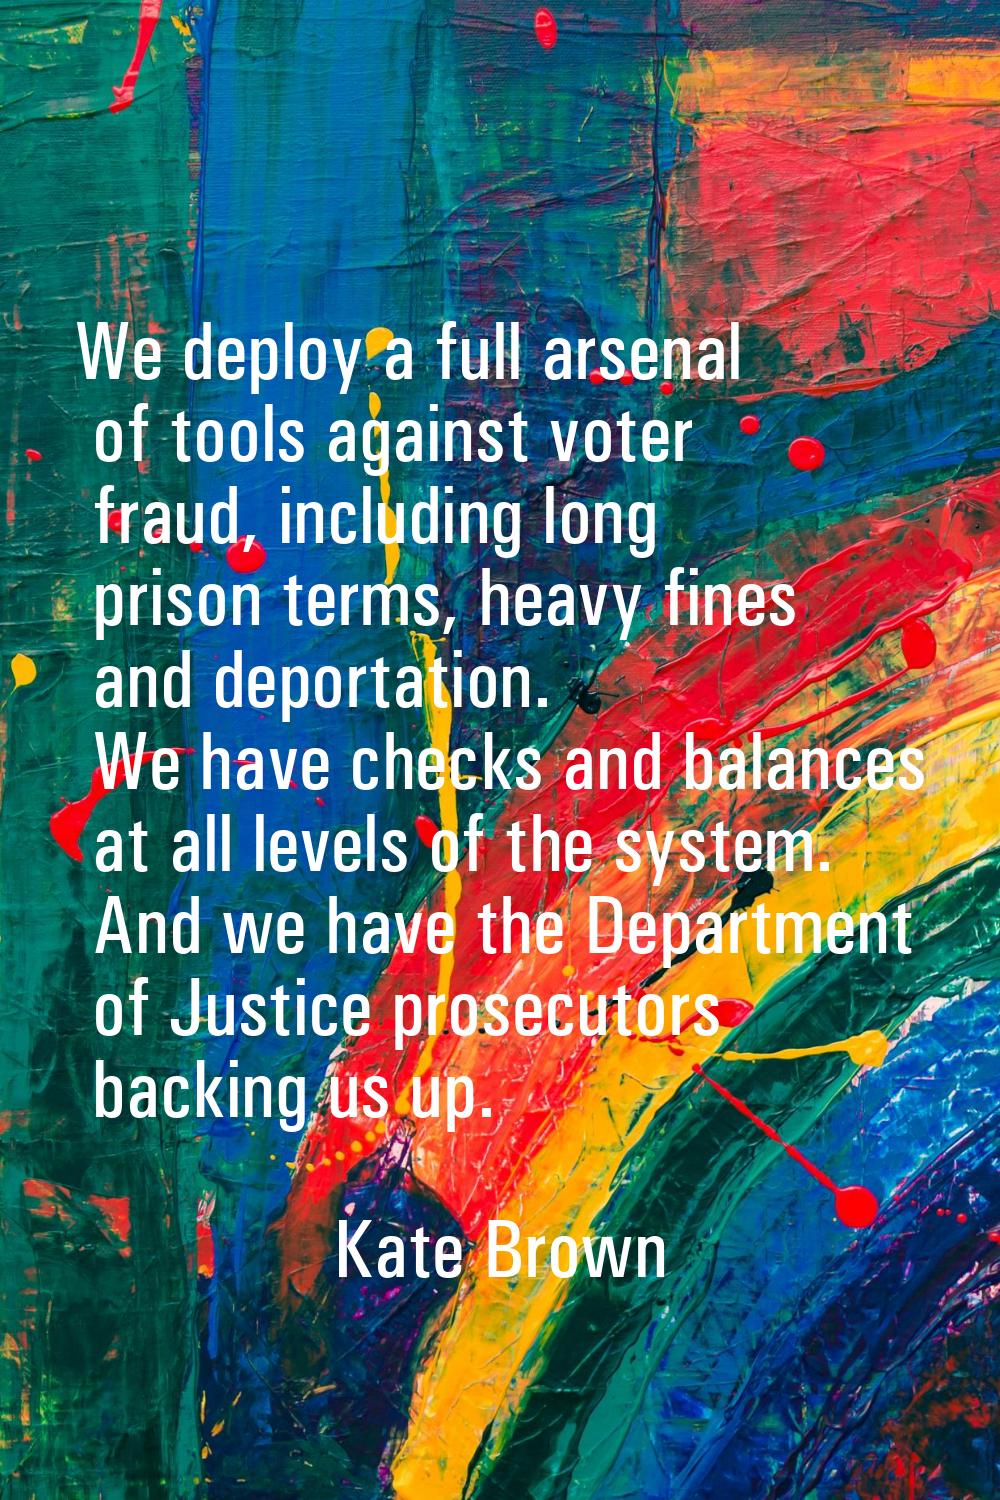 We deploy a full arsenal of tools against voter fraud, including long prison terms, heavy fines and